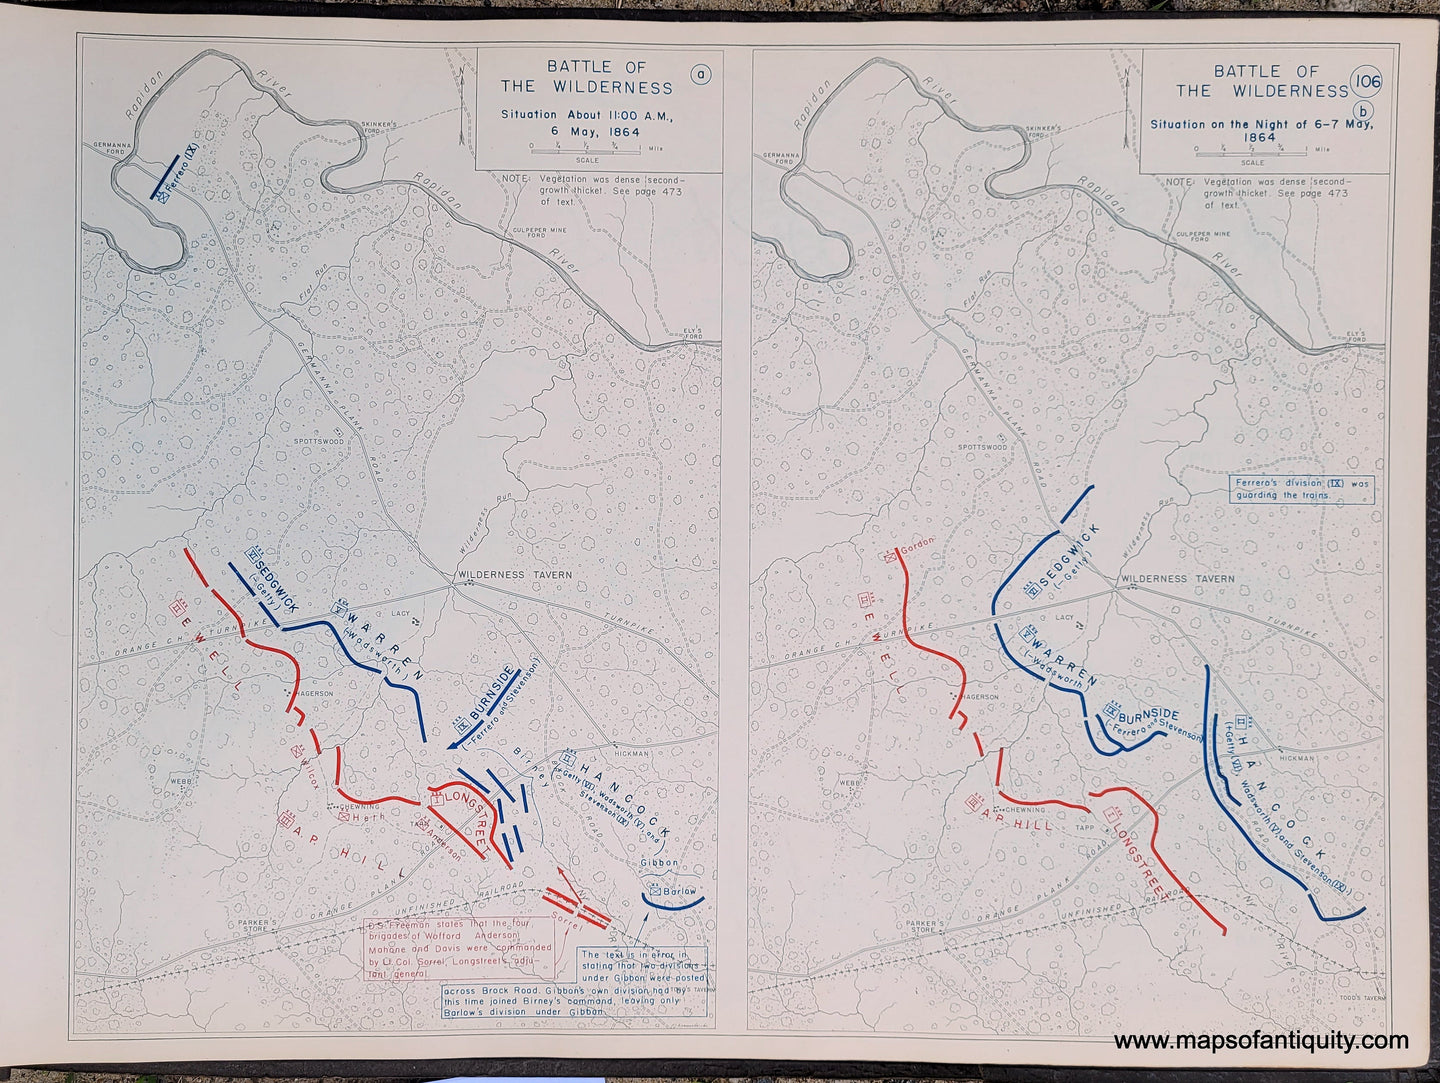 Genuine-Antique-Map-Battle-of-the-Wilderness-Situation-About-11-00-AM-6-May-1864-and-Situation-on-the-Night-of-6-7-May-1864-1948-Matthew-Forney-Steele-Dept-of-Military-Art-and-Engineering-US-Military-Academy-West-Point-Maps-Of-Antiquity